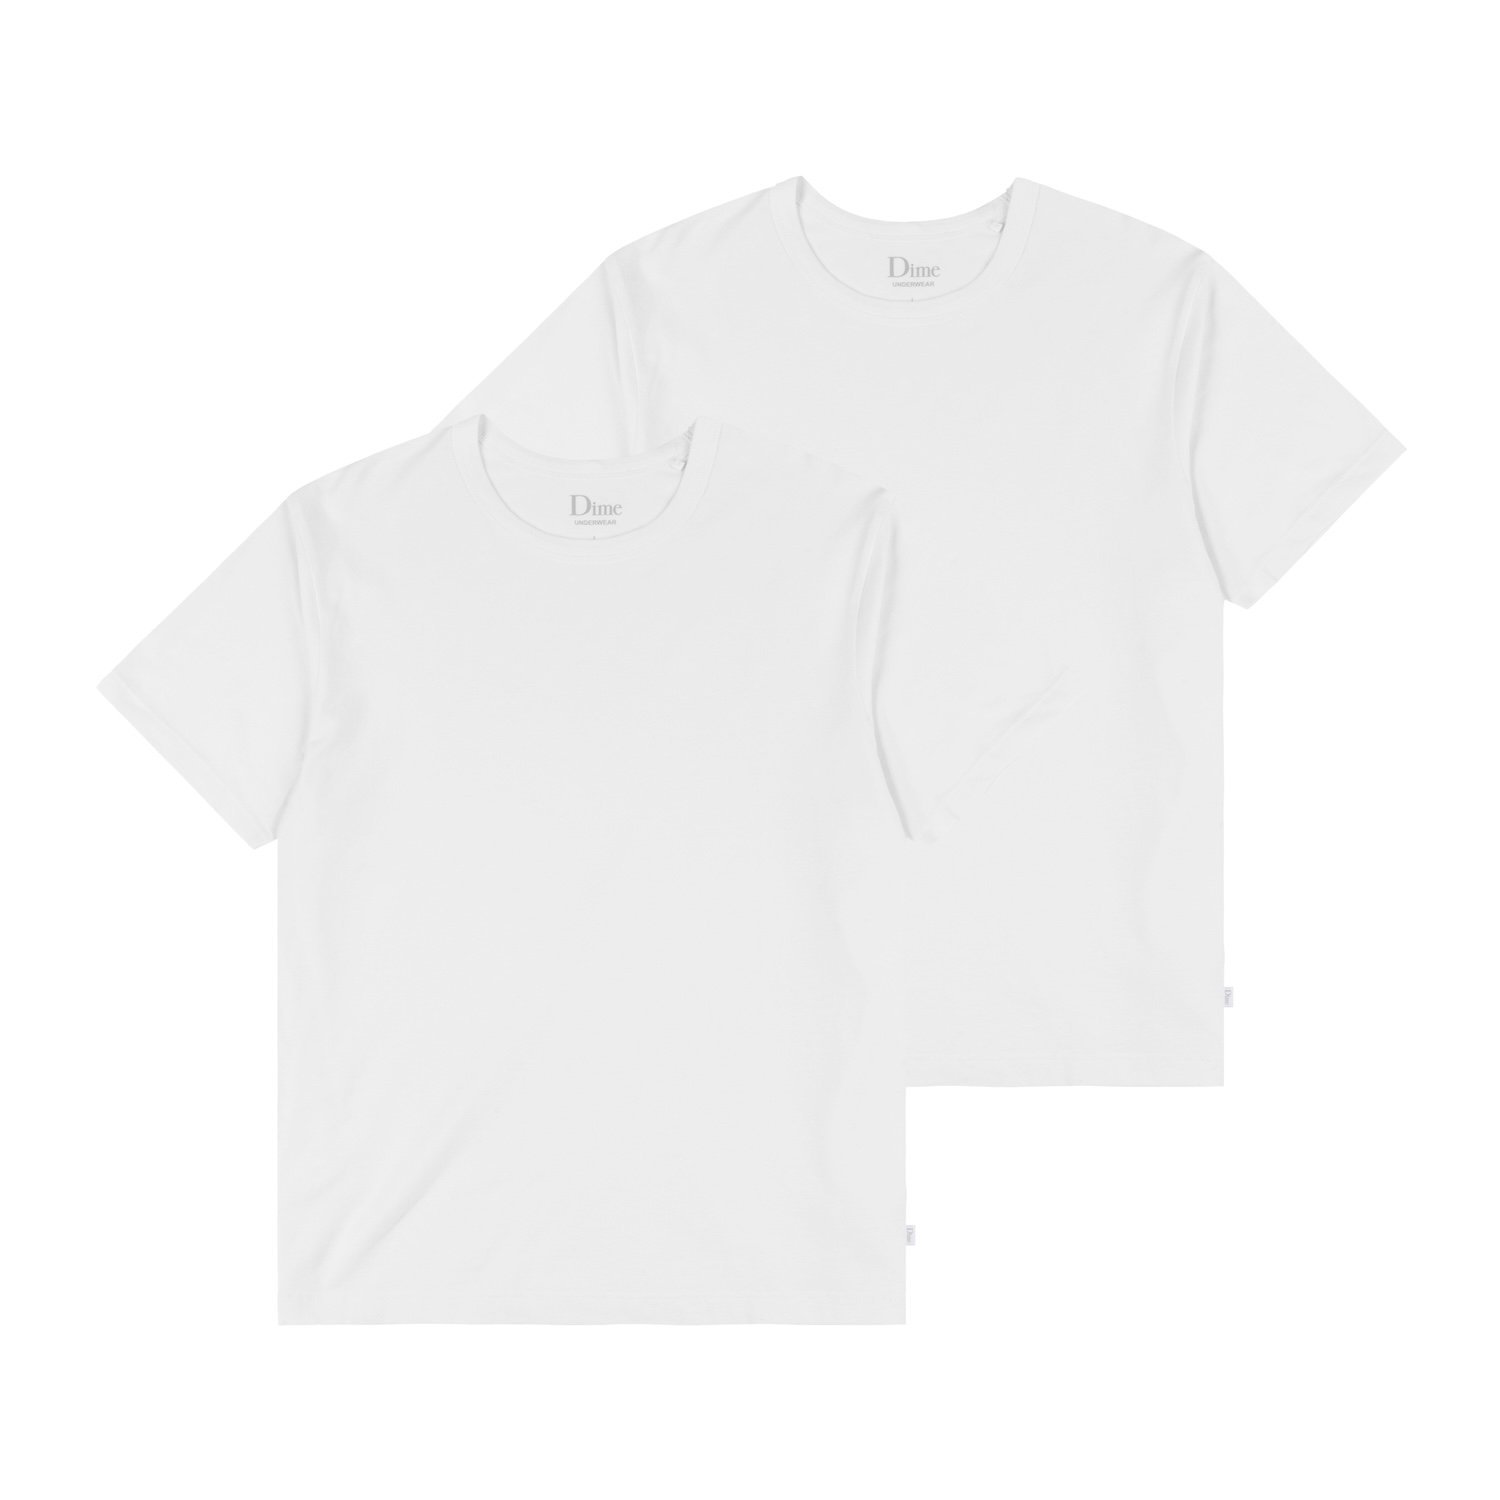 DIME<br>Dime 2 Pack T-Shirts<br>